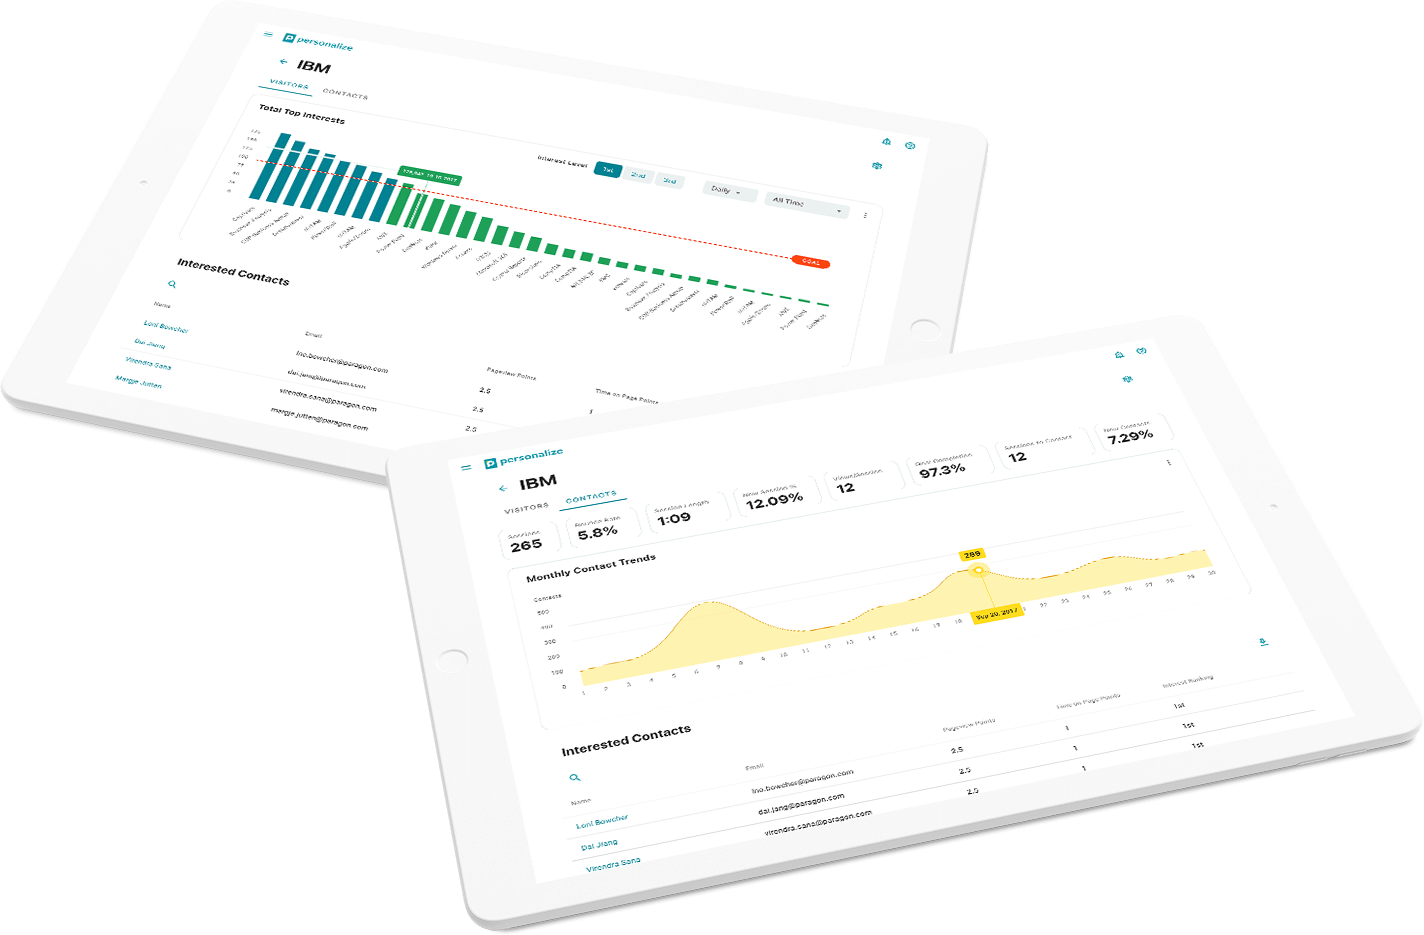 Image of an online marketing platform with engaging and intuitive data visualization dashboards